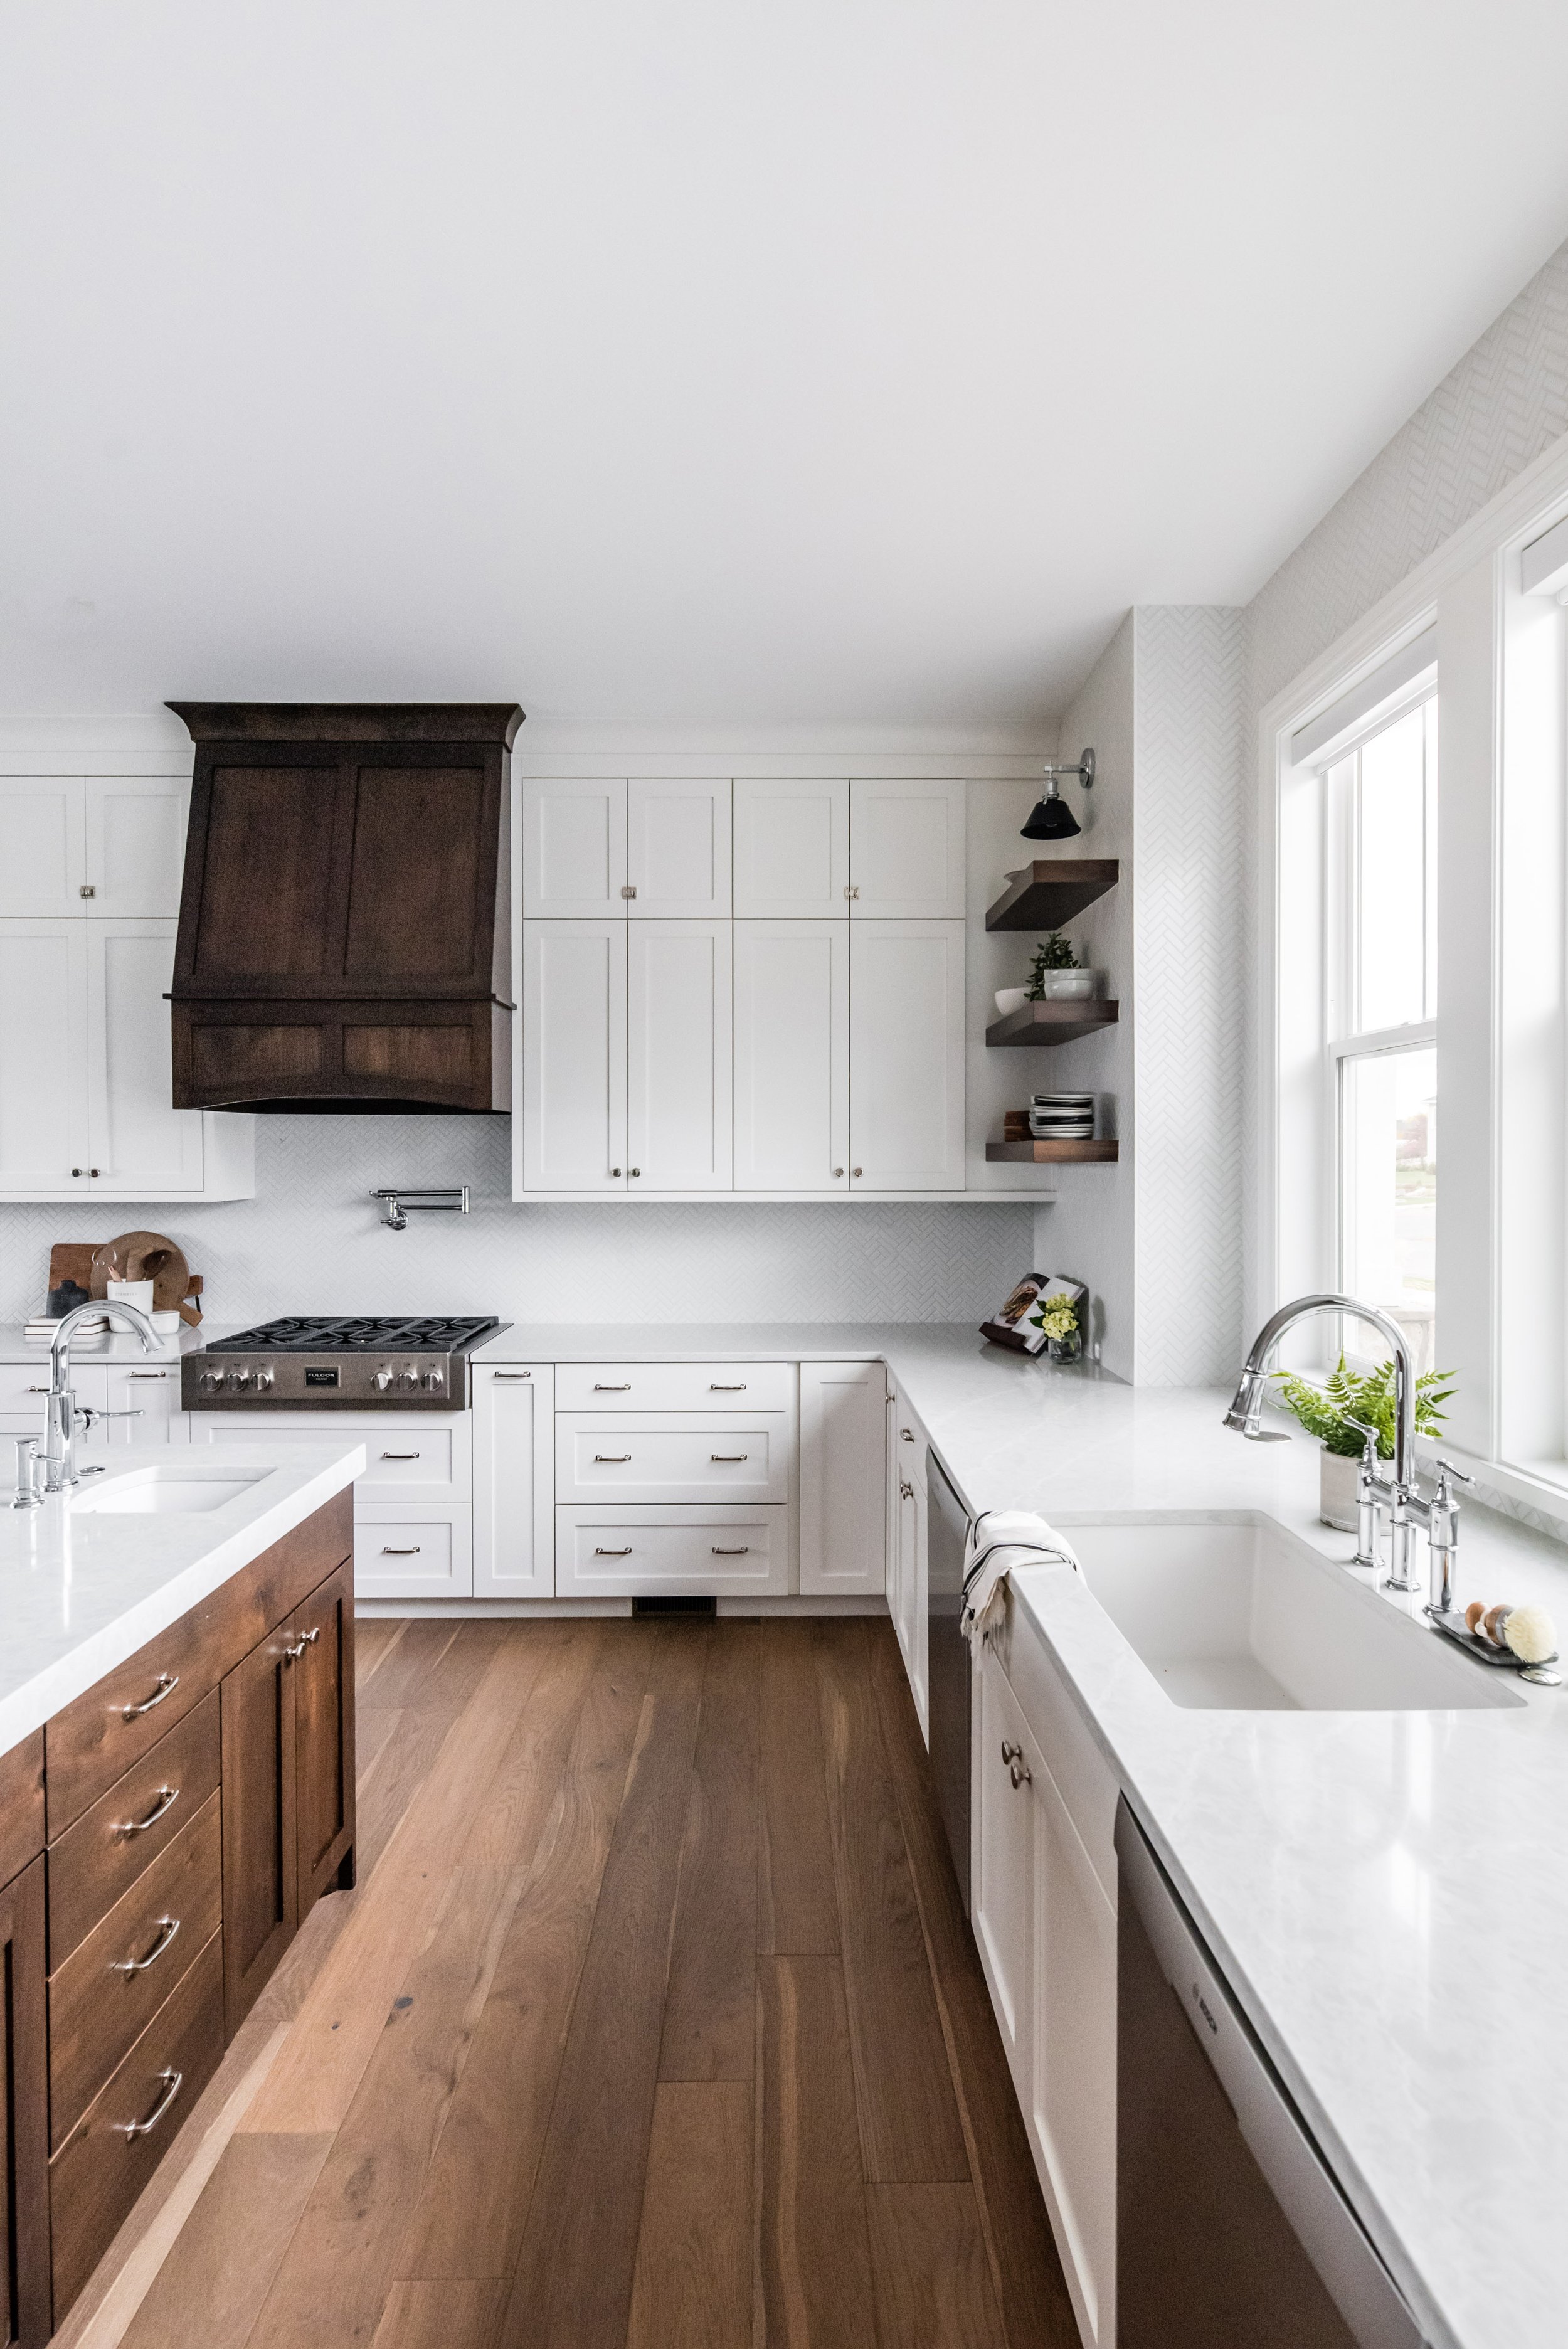  Consider your lifestyle and budget when picking the countertops that are right for your new home.&nbsp; #LizPowellDesign #InteriorDesignUtah #LizPowellDesign #InteriorDesignUtah #buildingahome #countertops #dreamhome #kitchencountertops #bathroomcou